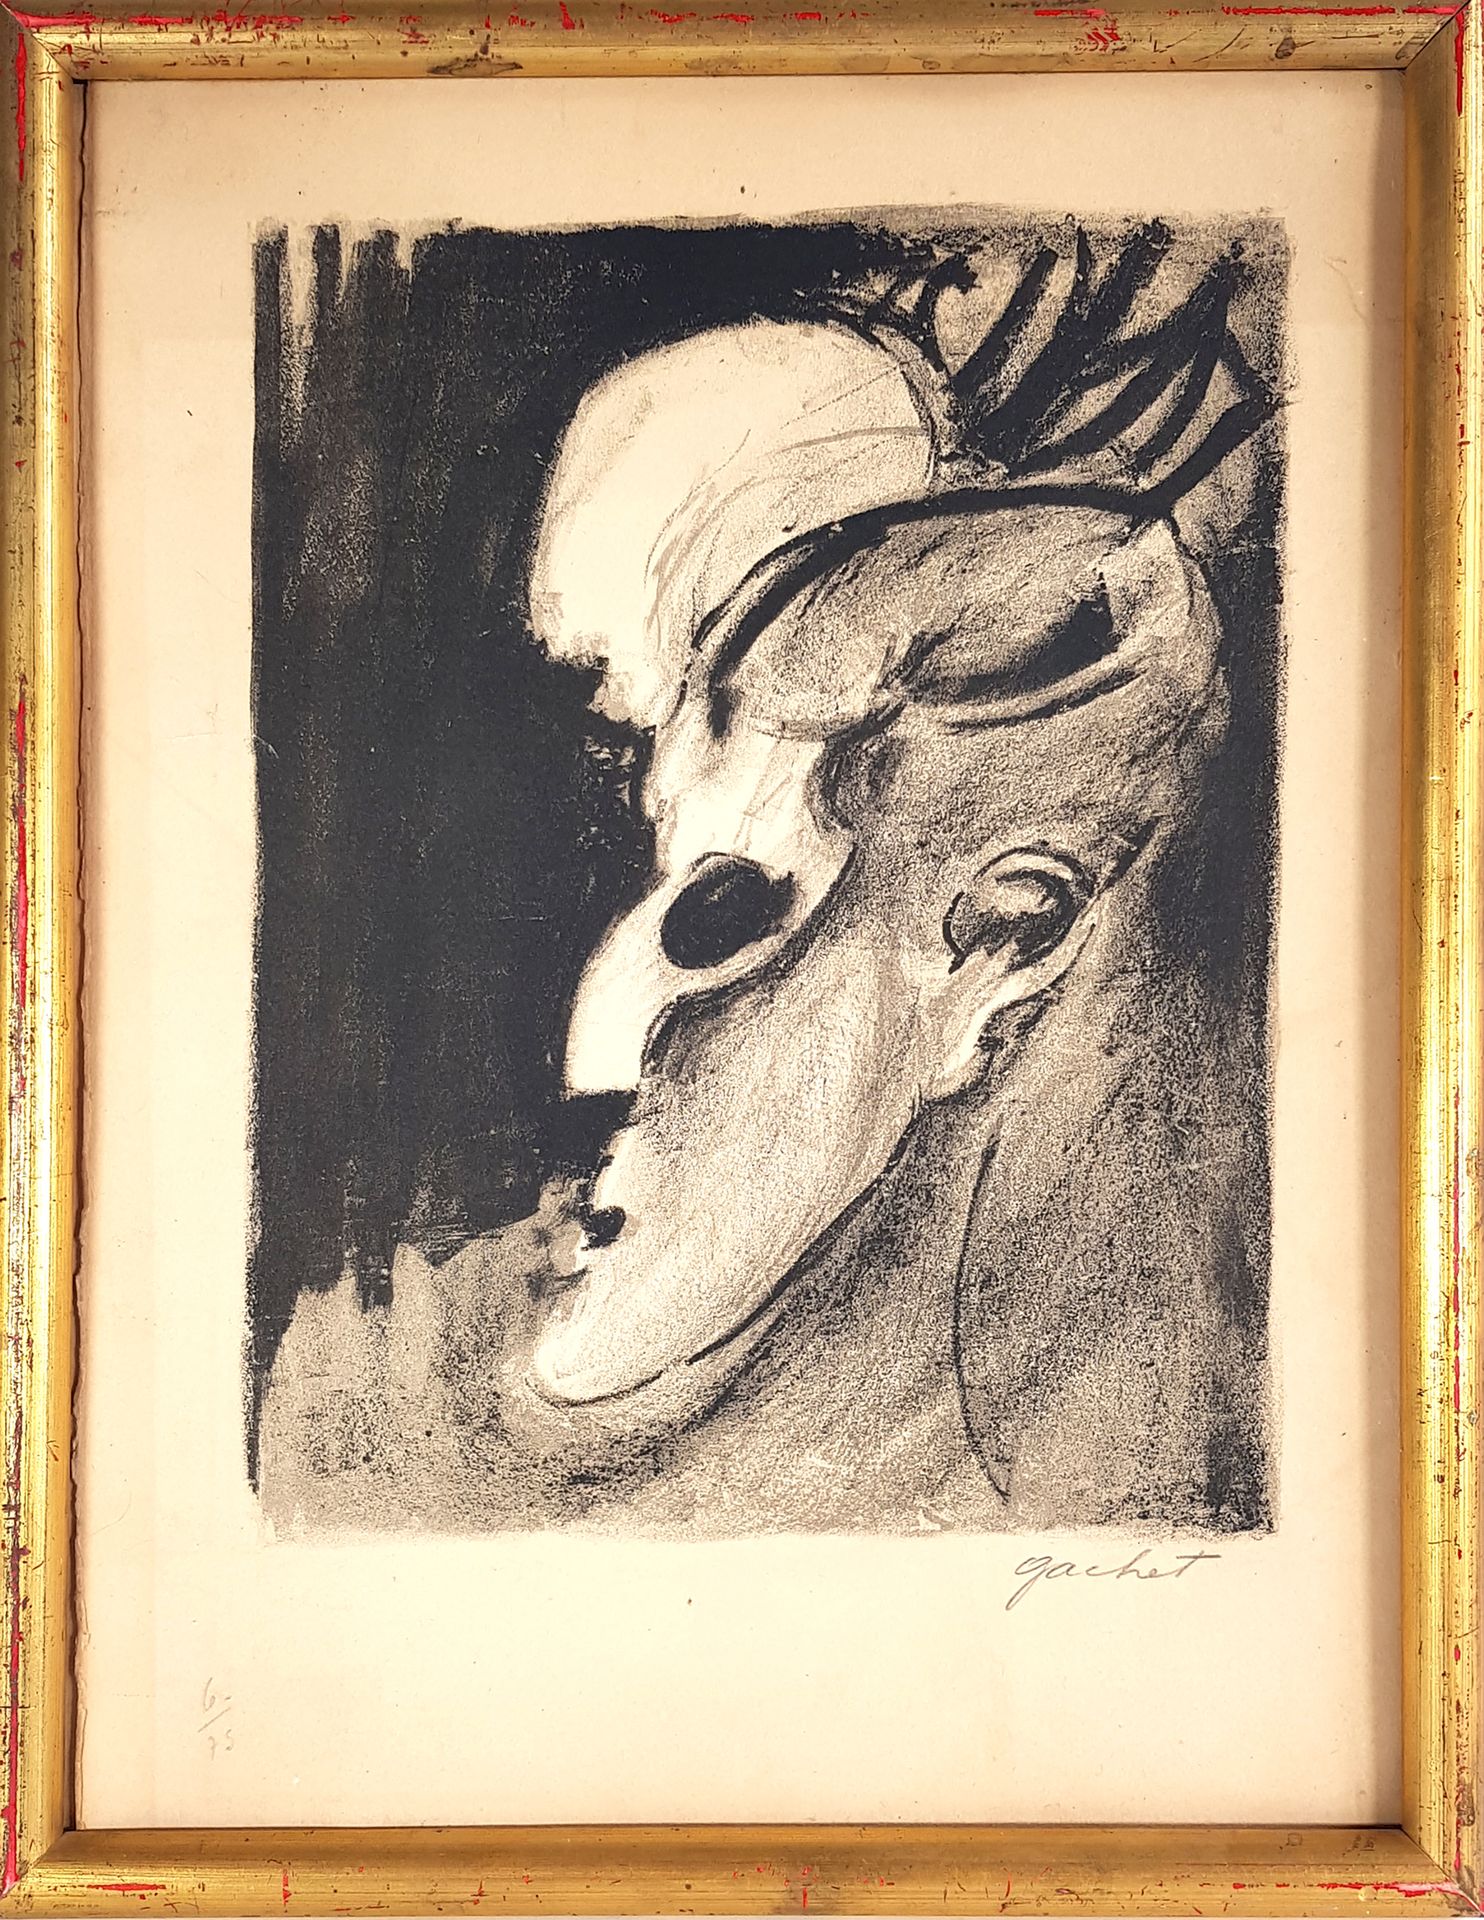 Null GACHET (School of the 20th century)

The mask 

Lithograph in black signed &hellip;